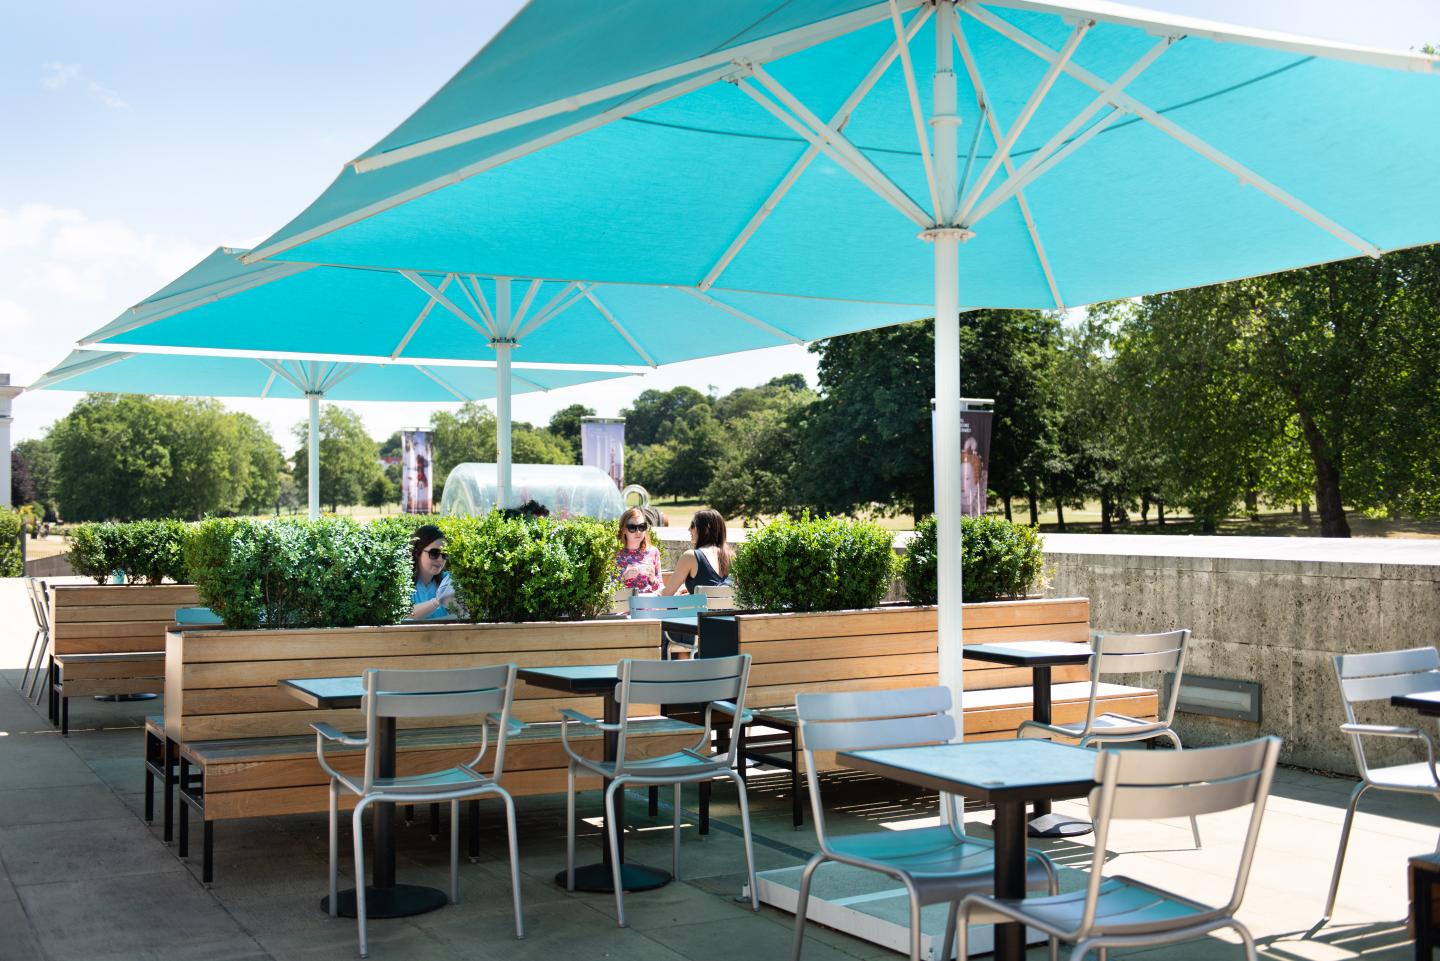 A view of the outdoor tables in the National Maritime Museum's cafe next to Greenwich Park